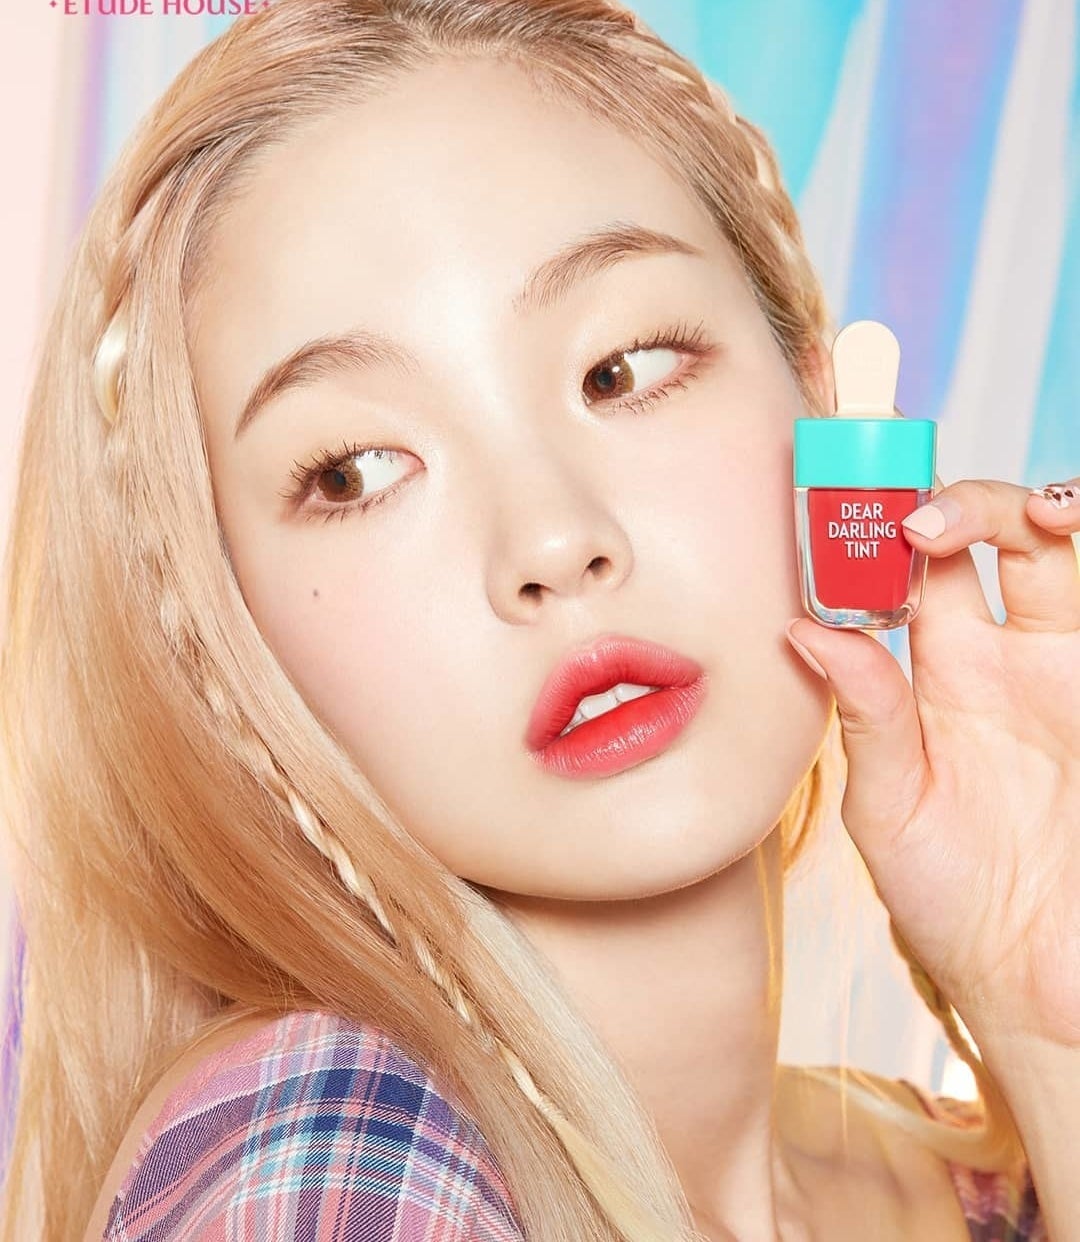 A person holds a lip tint that looks like a popsicle with a tint on their lips